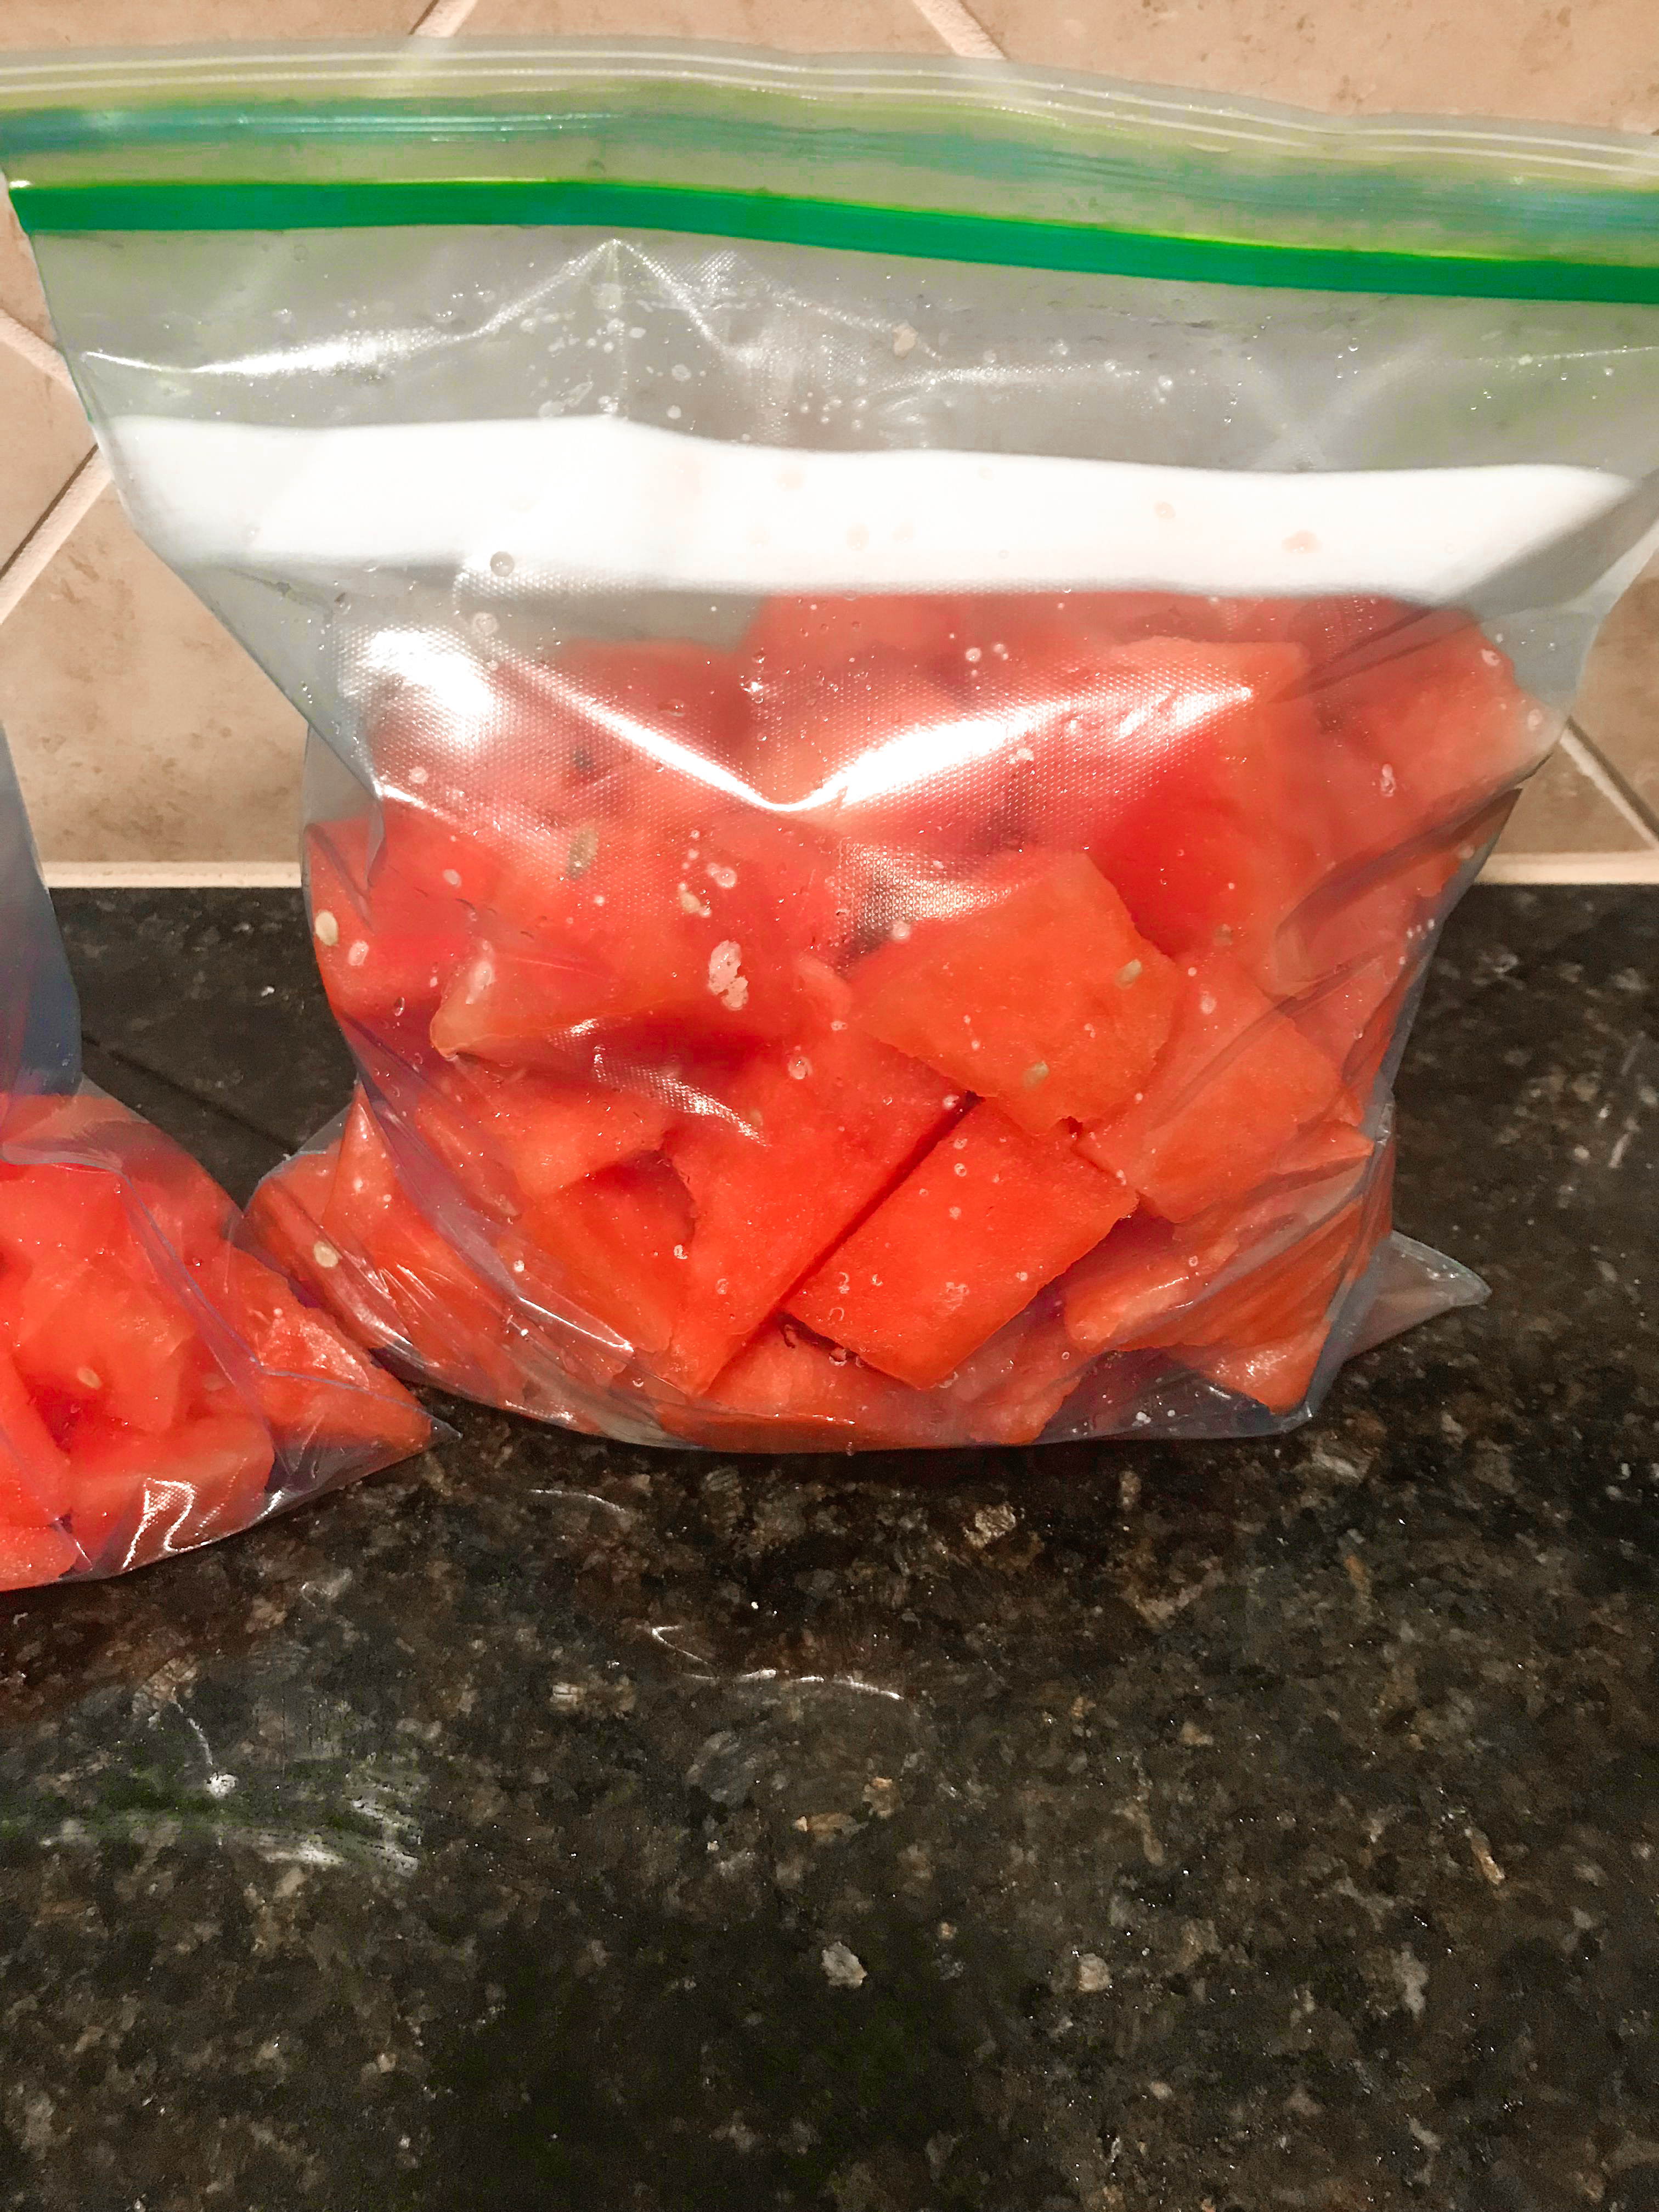 Cubed watermelon in a freezer bag/